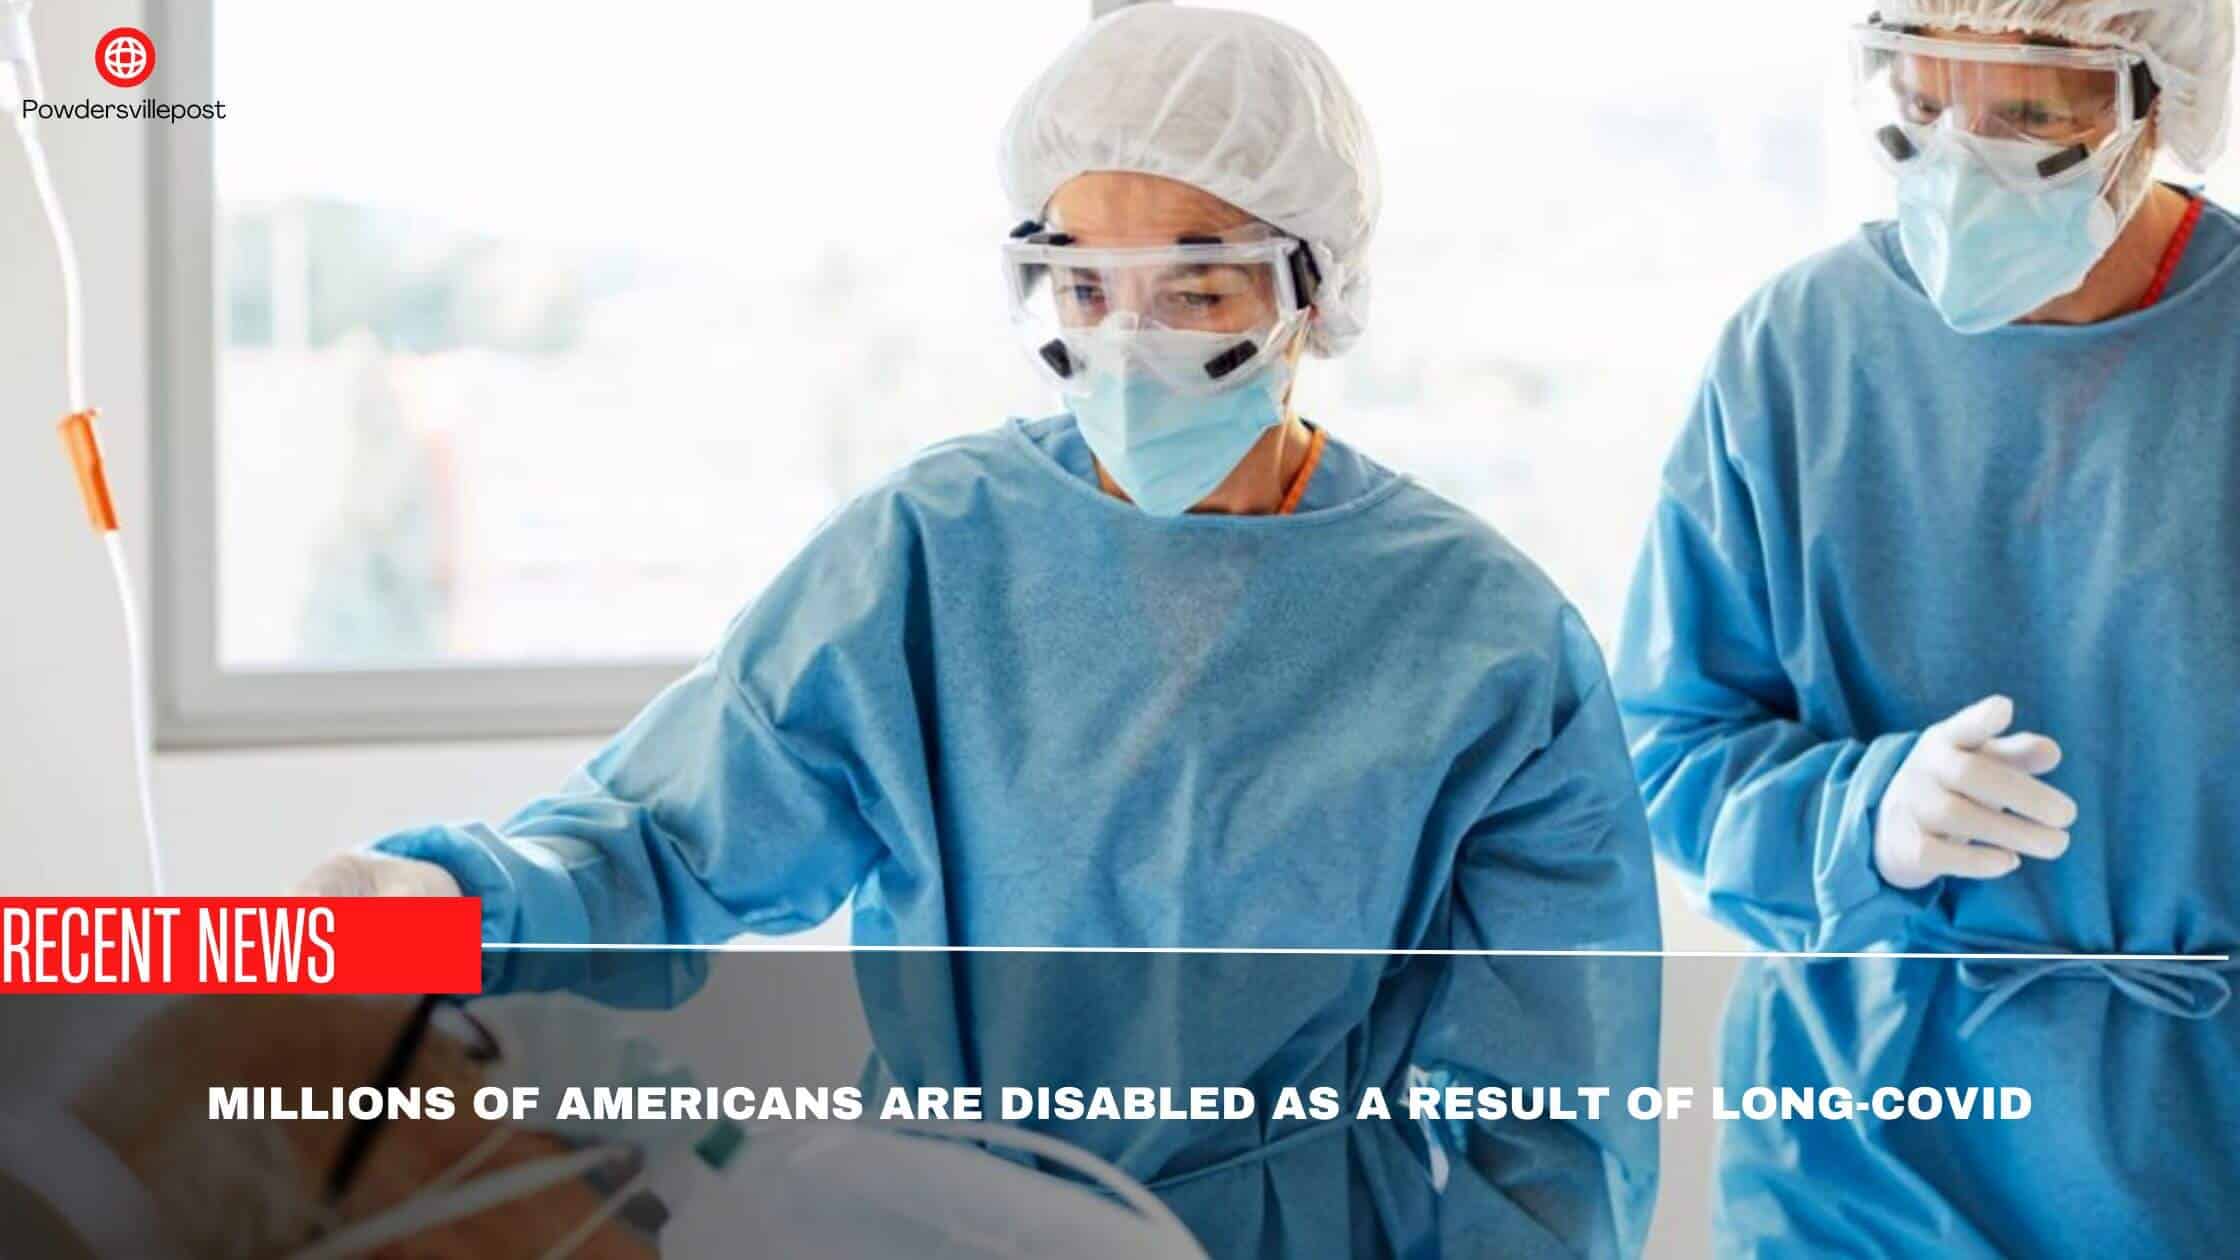 Millions Of Americans Are Disabled As A Result Of Long-Covid